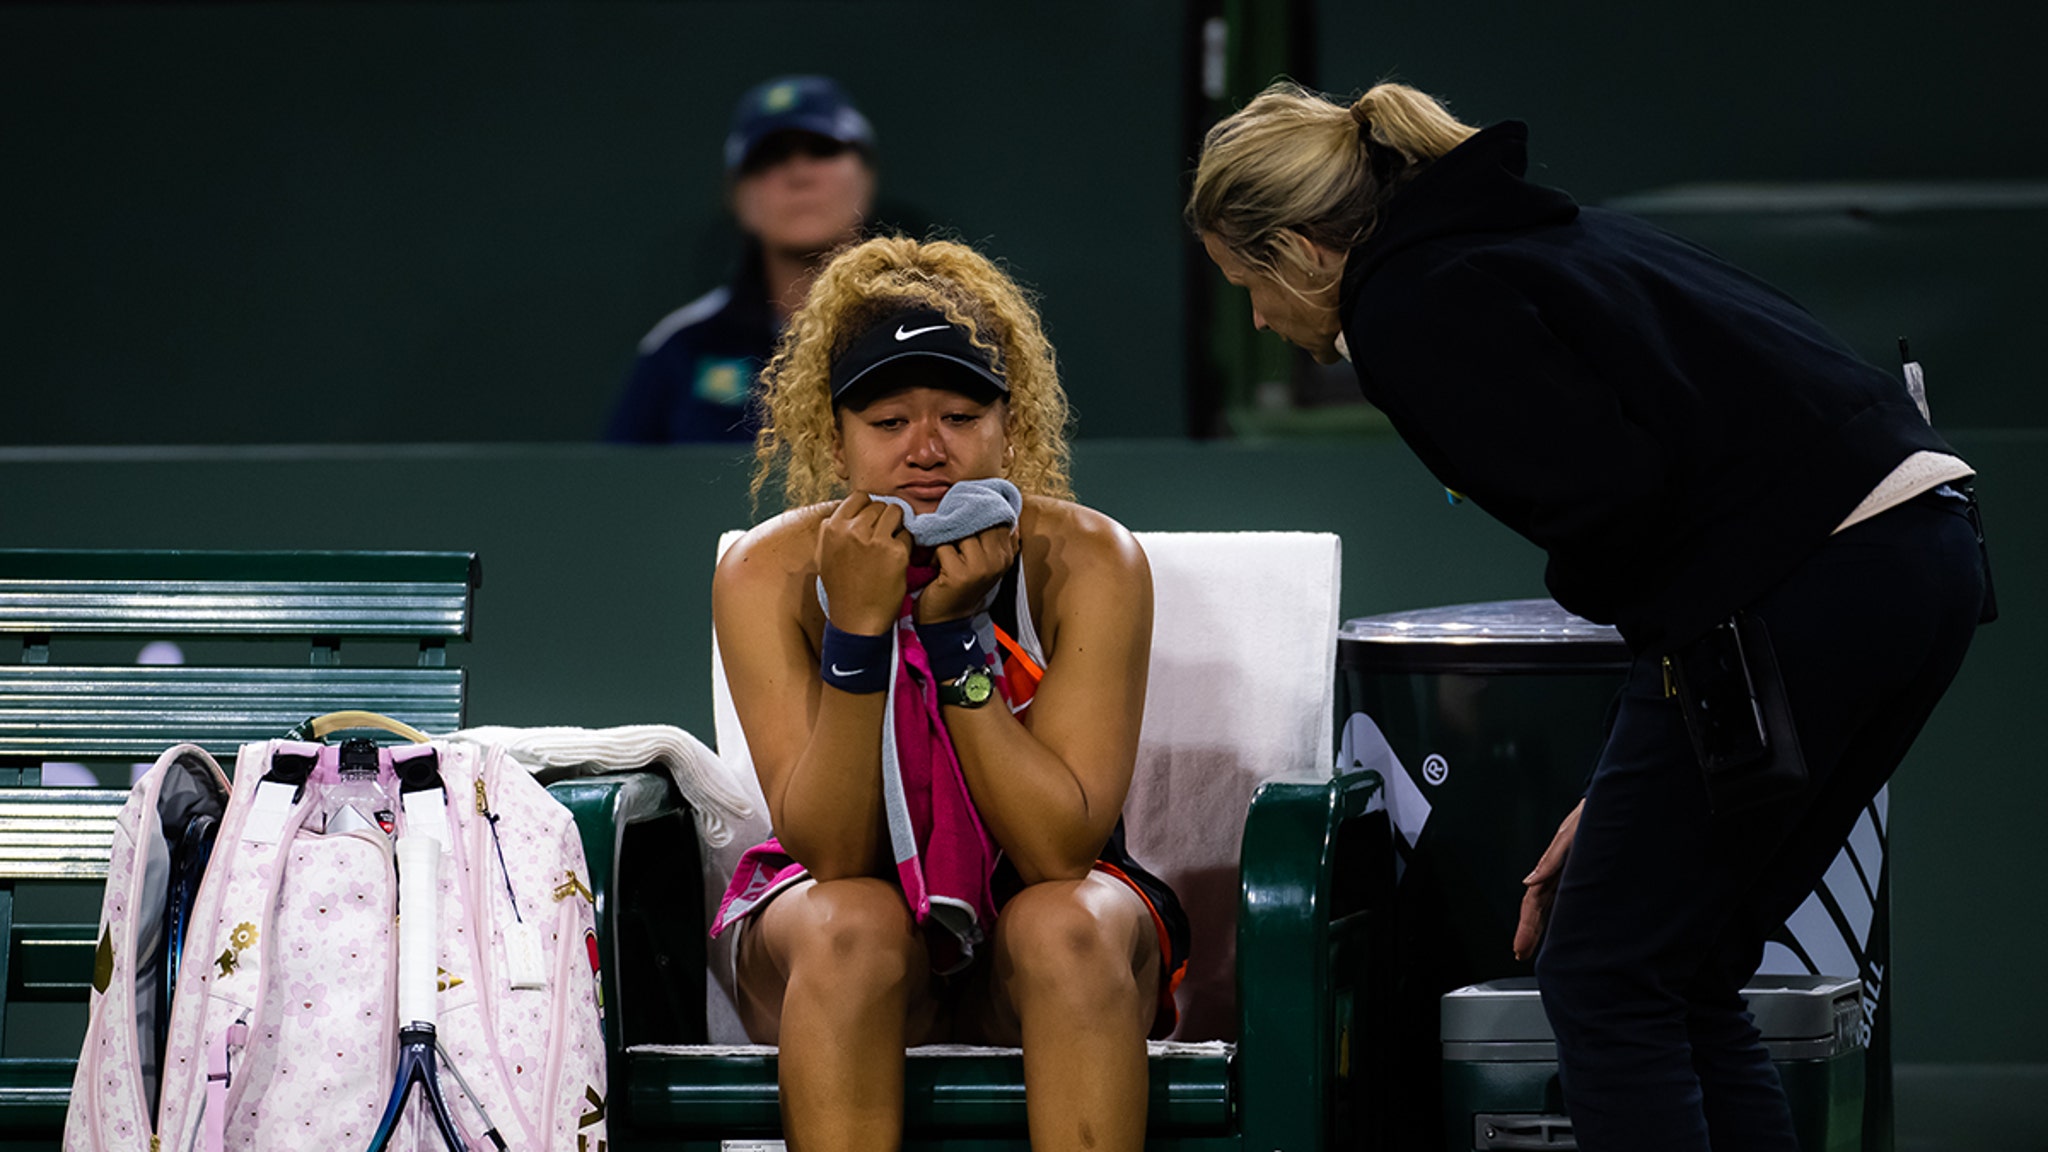 Naomi Osaka Reduced to Tears After Indian Wells Heckler Screams 'You Suck'